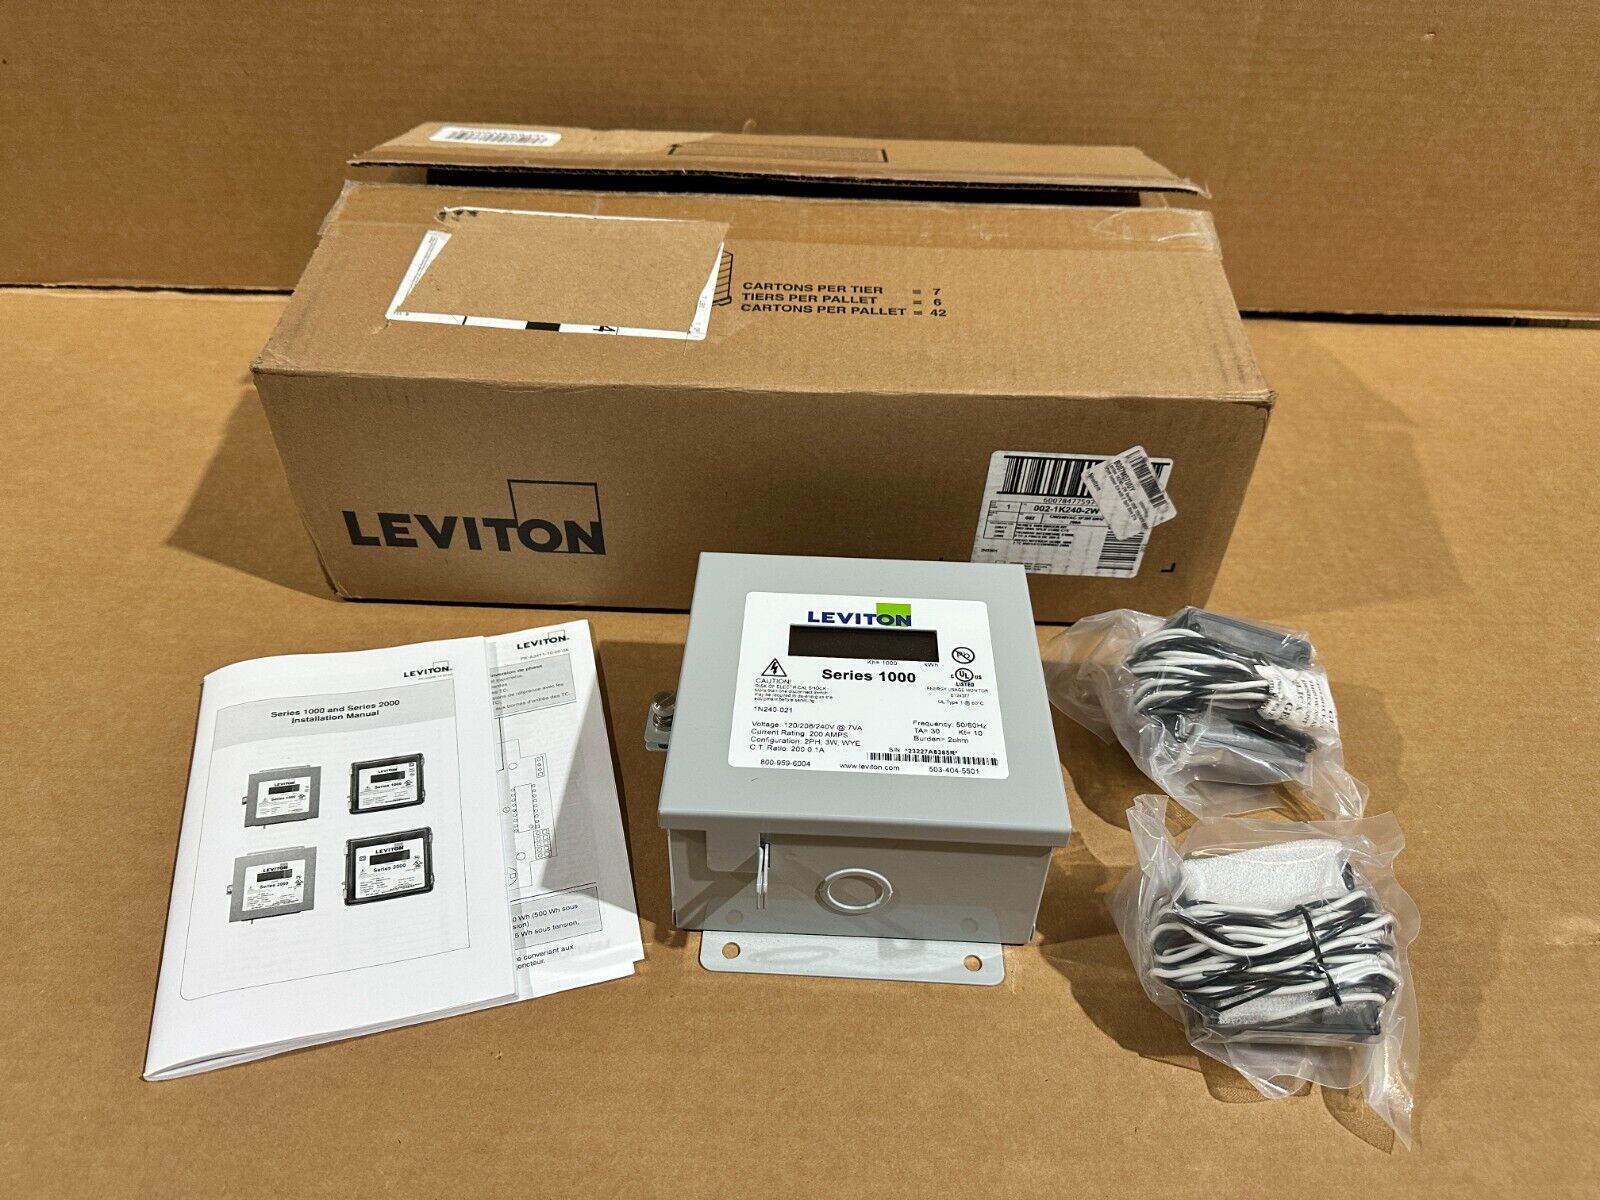 New Leviton 1K240-2W Series 1000 120/240V 200A 1P3W Indoor Kit with 2 Split Core